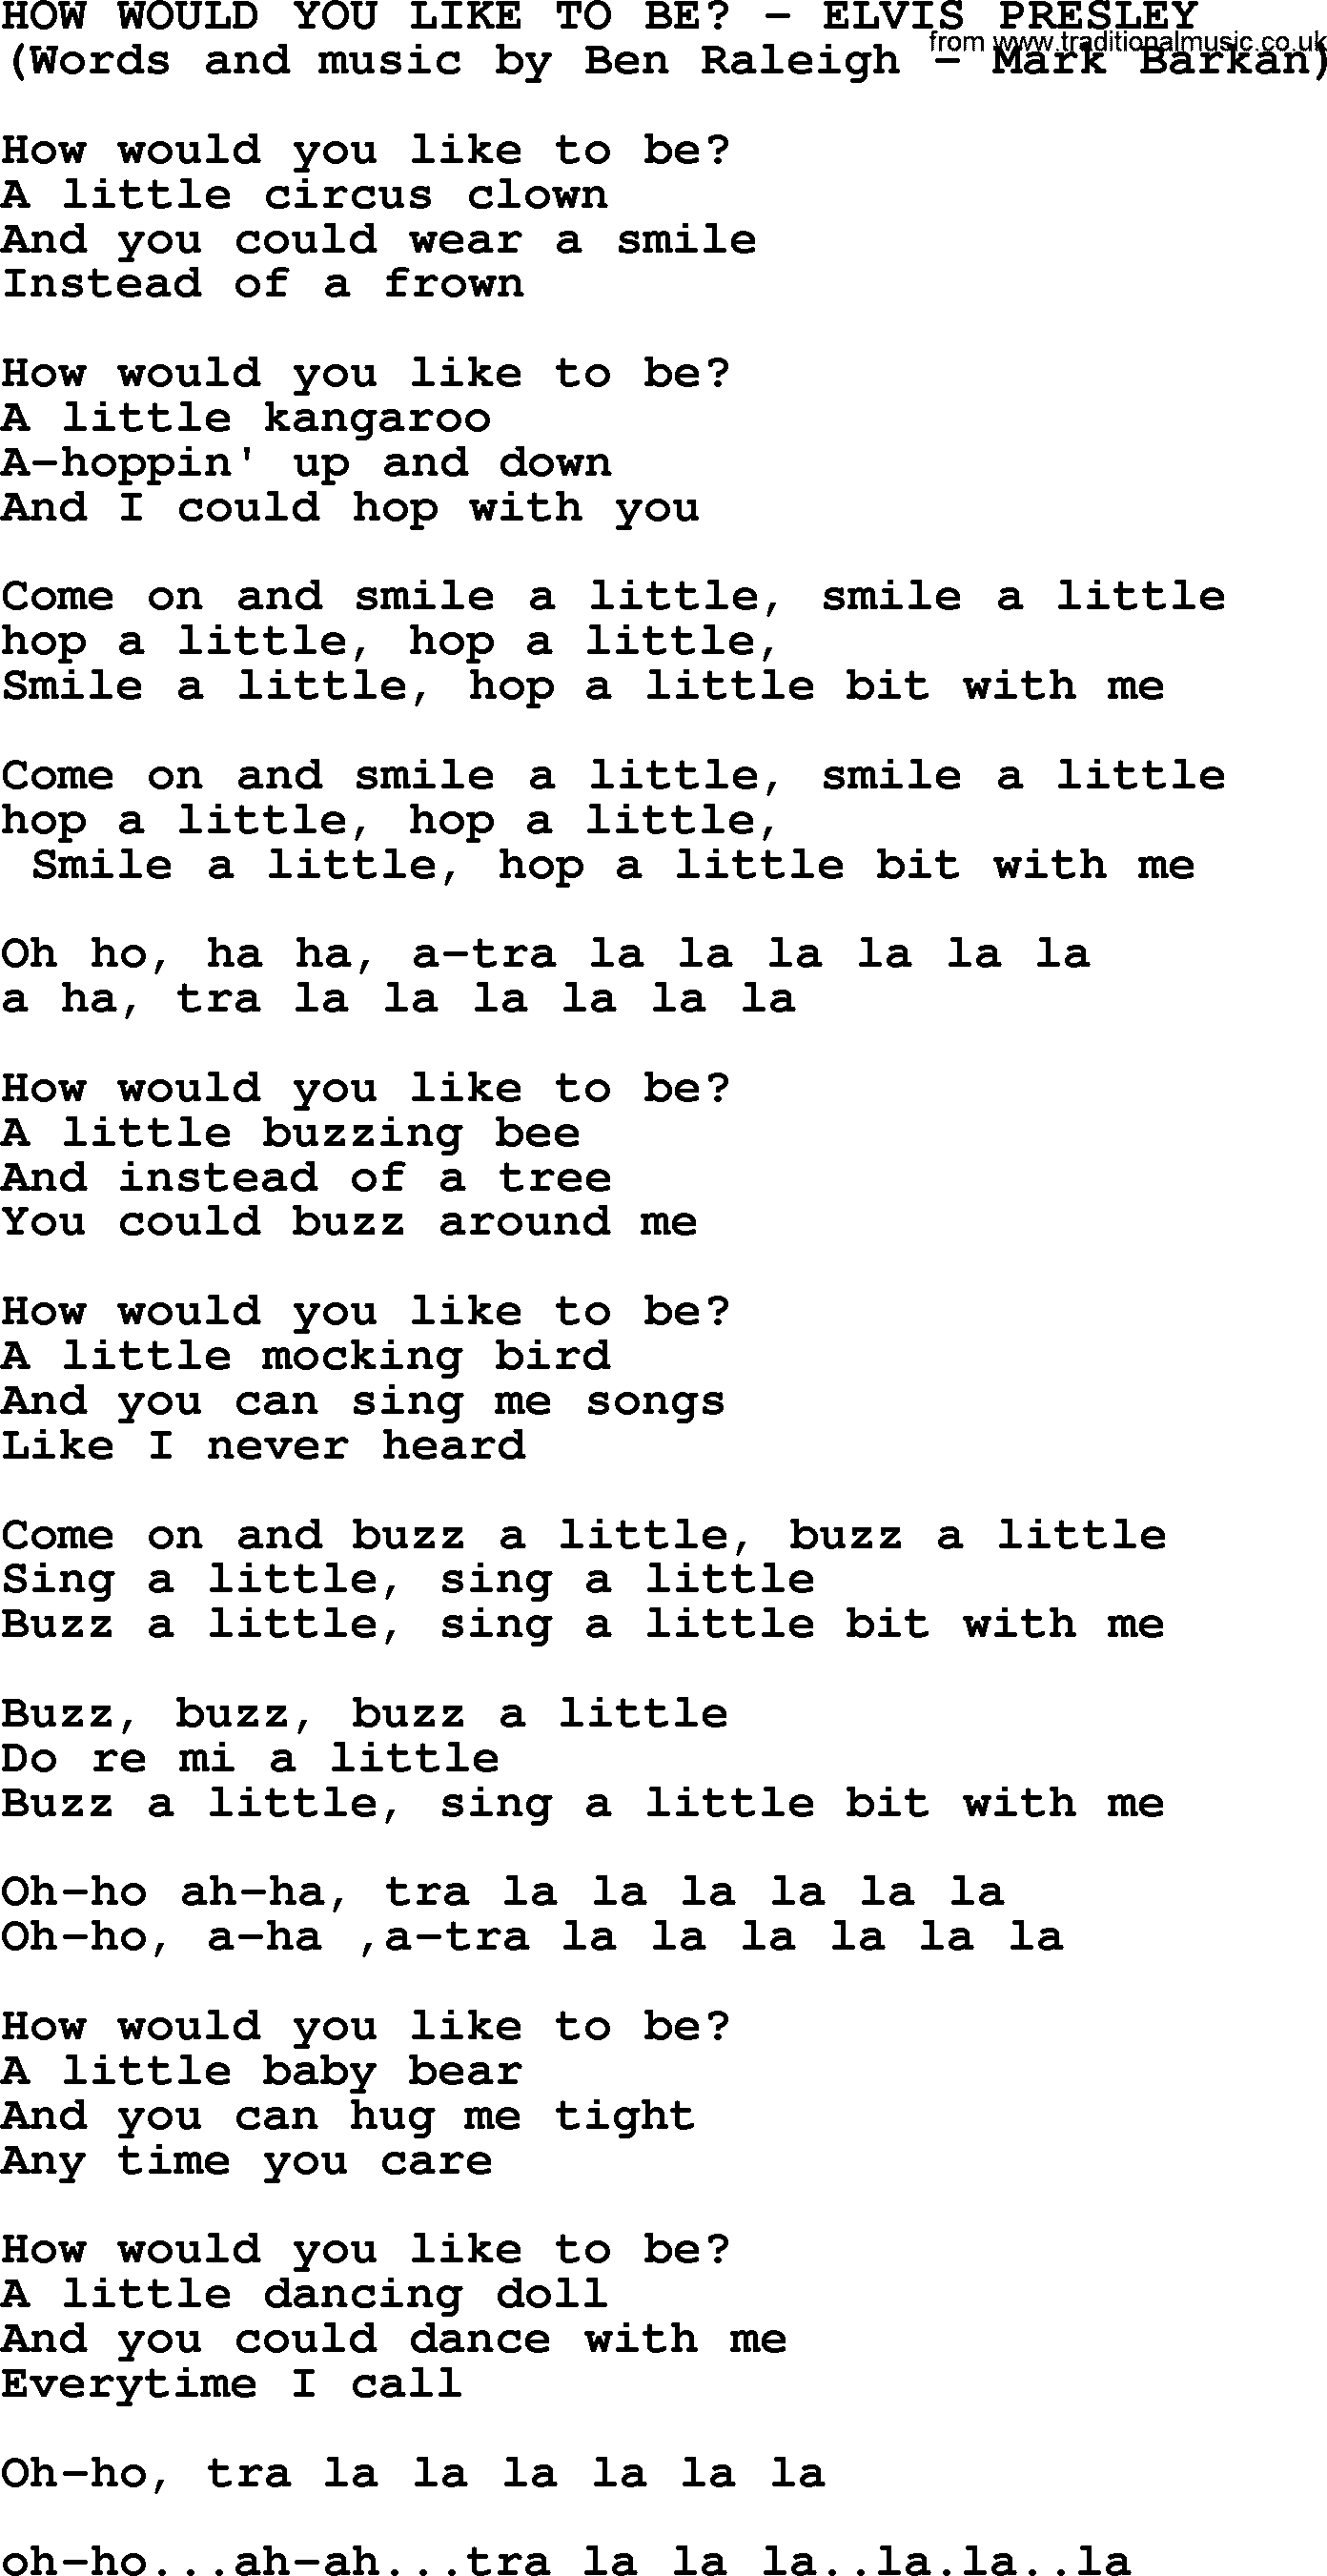 Elvis Presley song: How Would You Like To Be_ lyrics